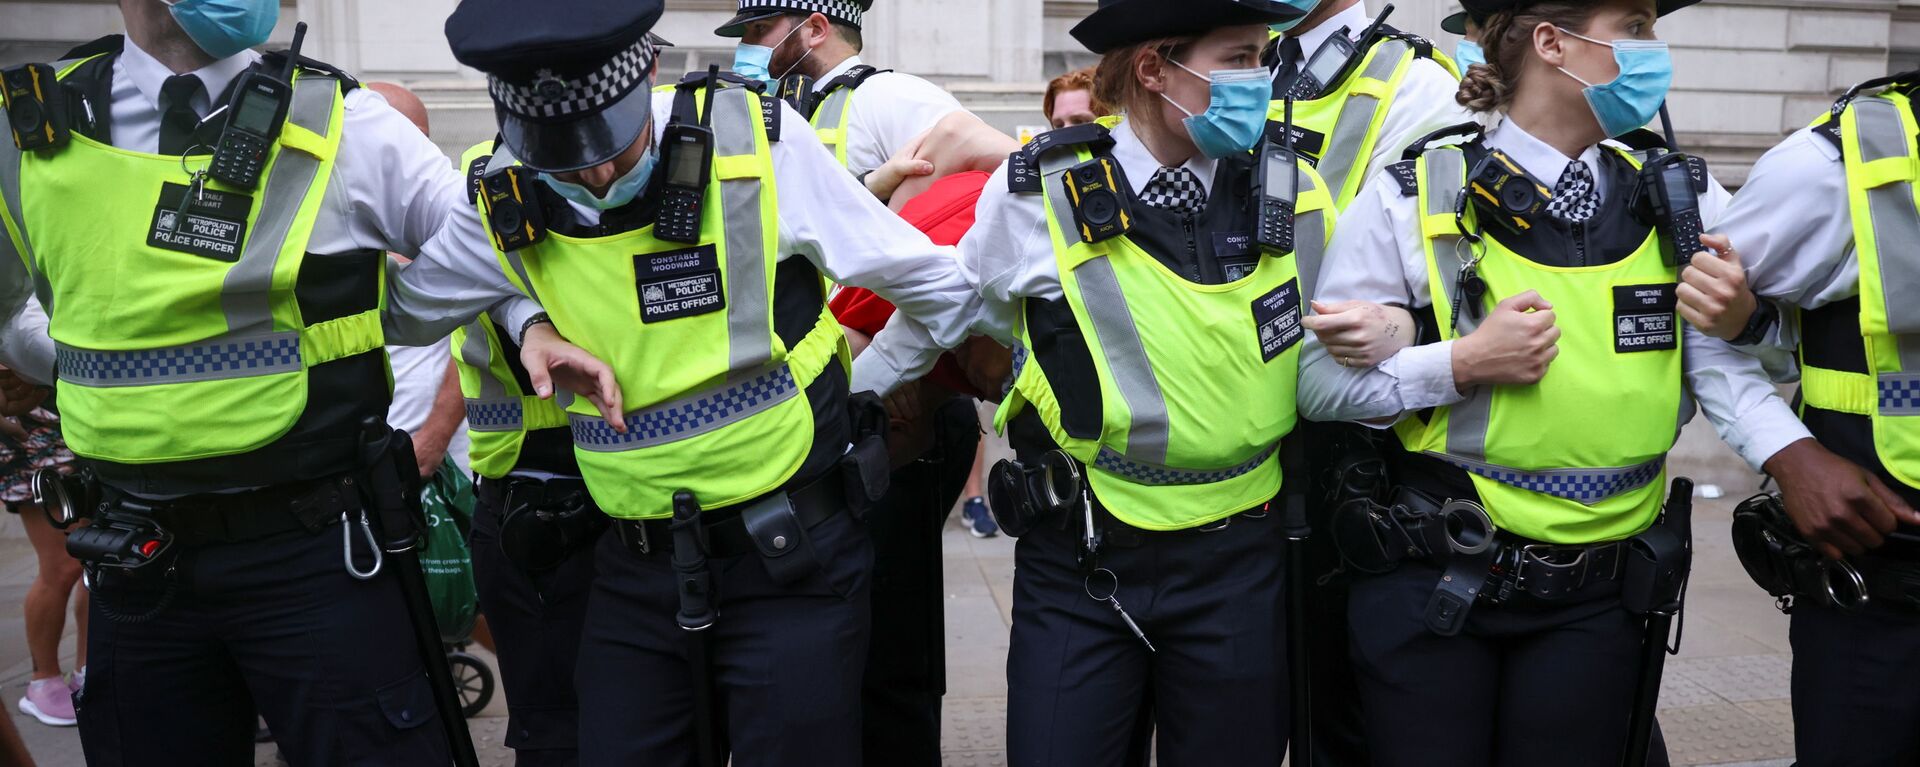 Police officers apprehend a demonstrator during an anti-lockdown and anti-vaccine protest, amid the coronavirus disease (COVID-19) pandemic, in London, Britain, June 14, 2021. REUTERS - Sputnik International, 1920, 18.12.2021